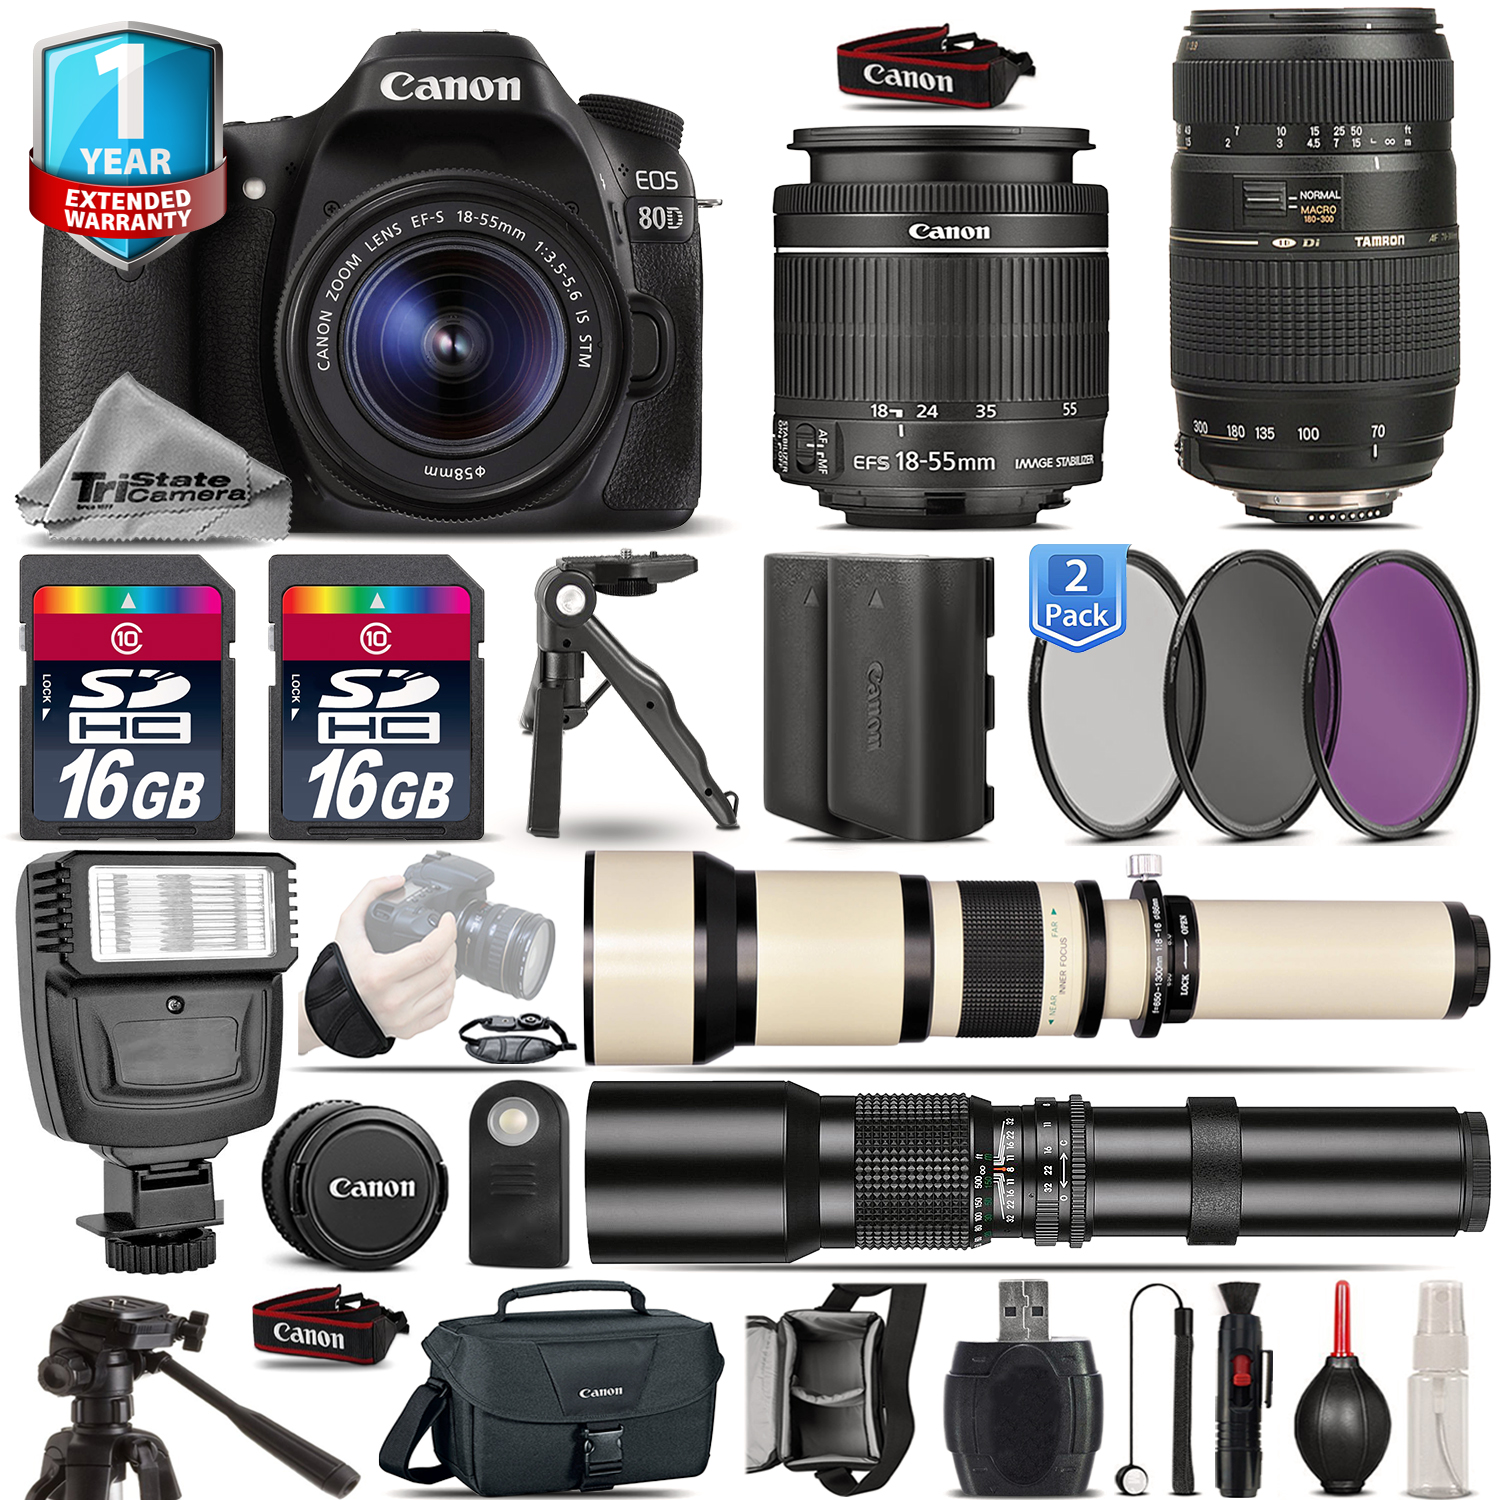 EOS 80D DSLR Camera + 18-55mm IS + 70-300mm + Extra Battery + 1yr Warranty *FREE SHIPPING*